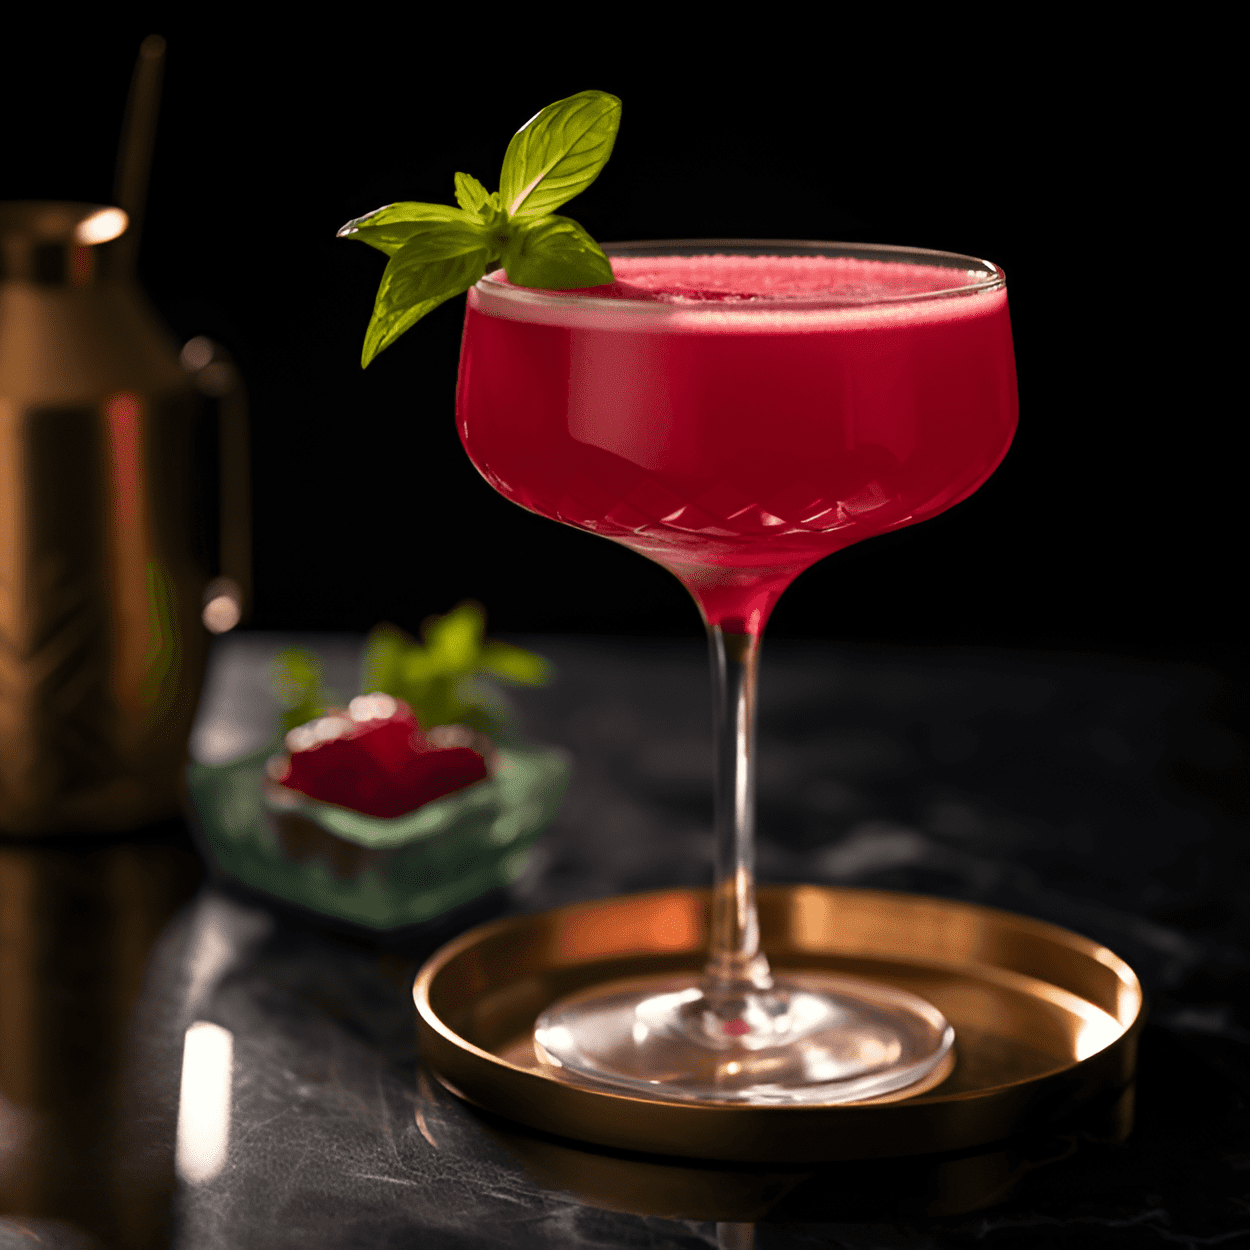 Beetroot Bliss Cocktail Recipe - The Beetroot Bliss is a refreshing cocktail with a unique, earthy taste. The sweetness of the beetroot juice is balanced by the tartness of the lemon and the smoothness of the vodka. It's a light, crisp, and slightly sweet cocktail with a hint of earthiness.